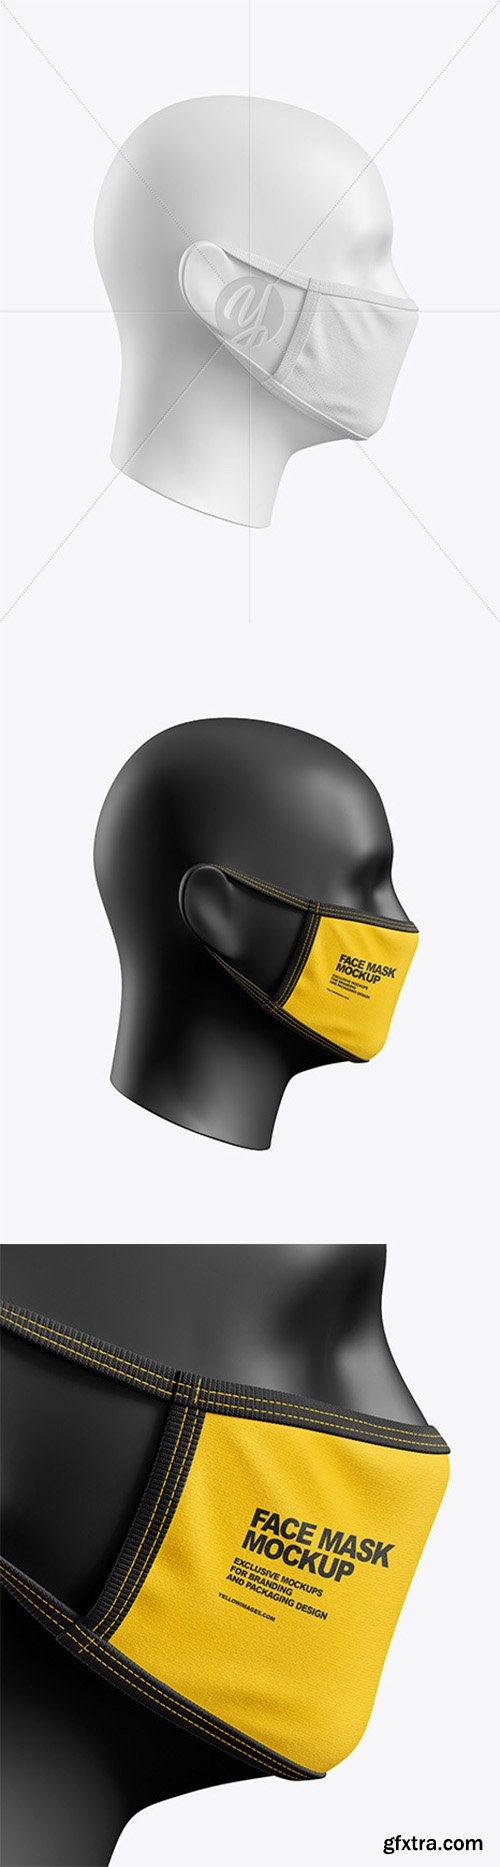 Download 28+ Boxing Headgear Mockup Front View Pics Yellowimages ...